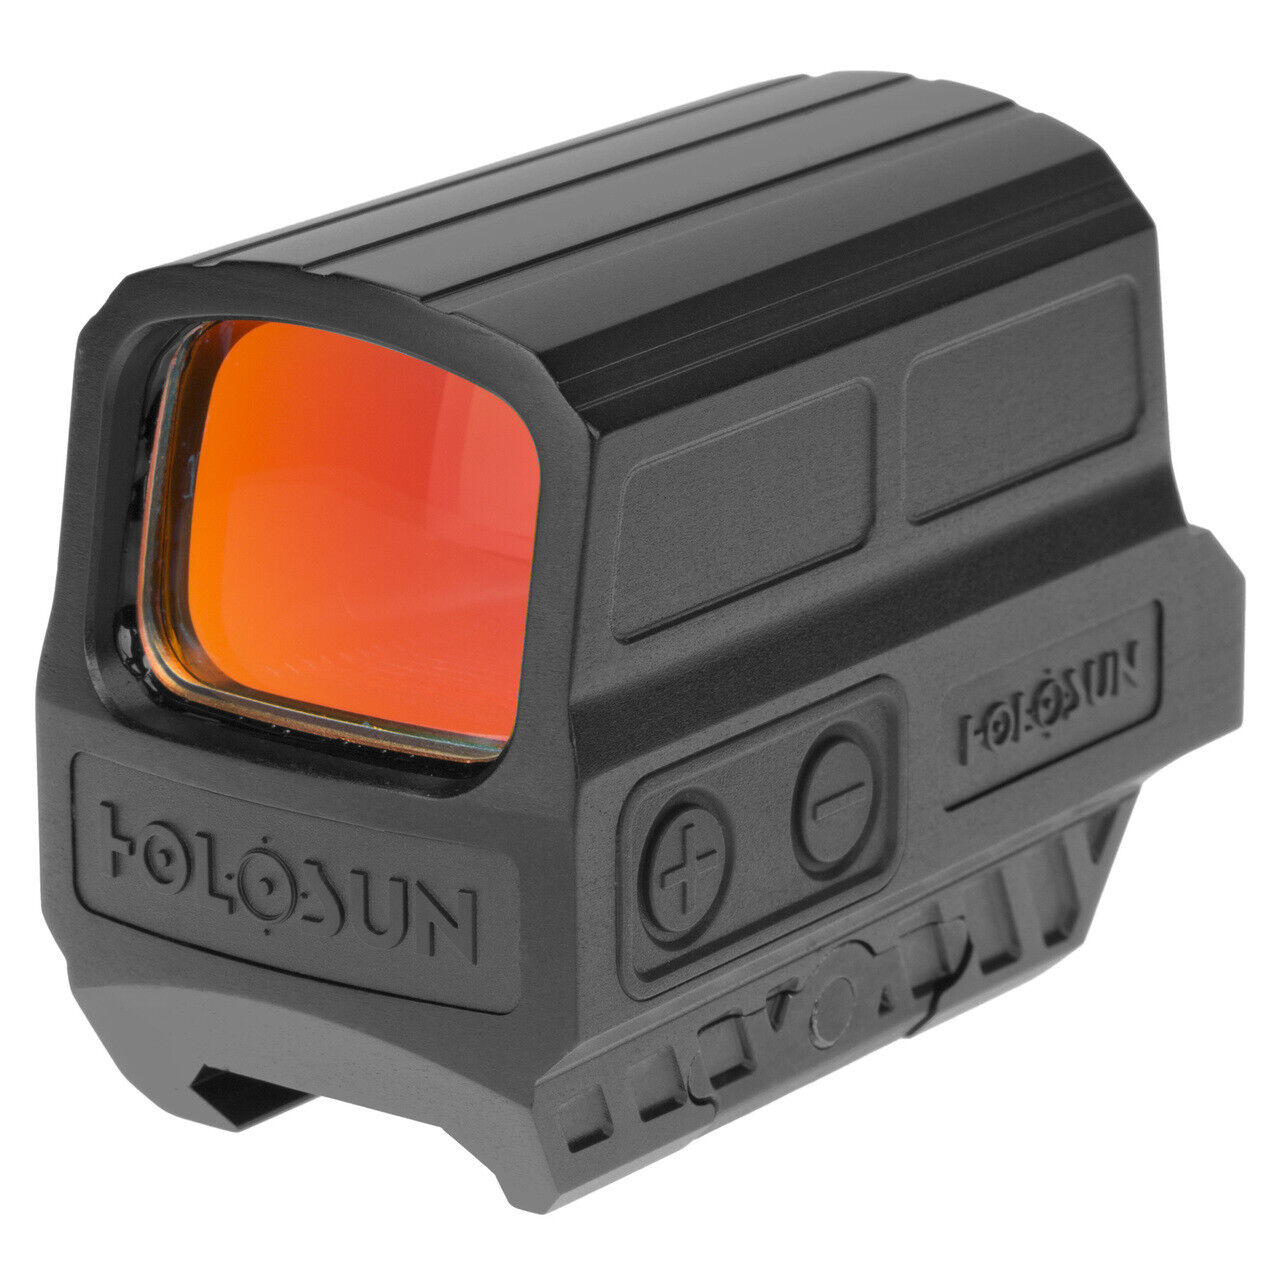 HOLOSUN HS512C Open Reflex Sight - Red Reticle for sale online | eBay